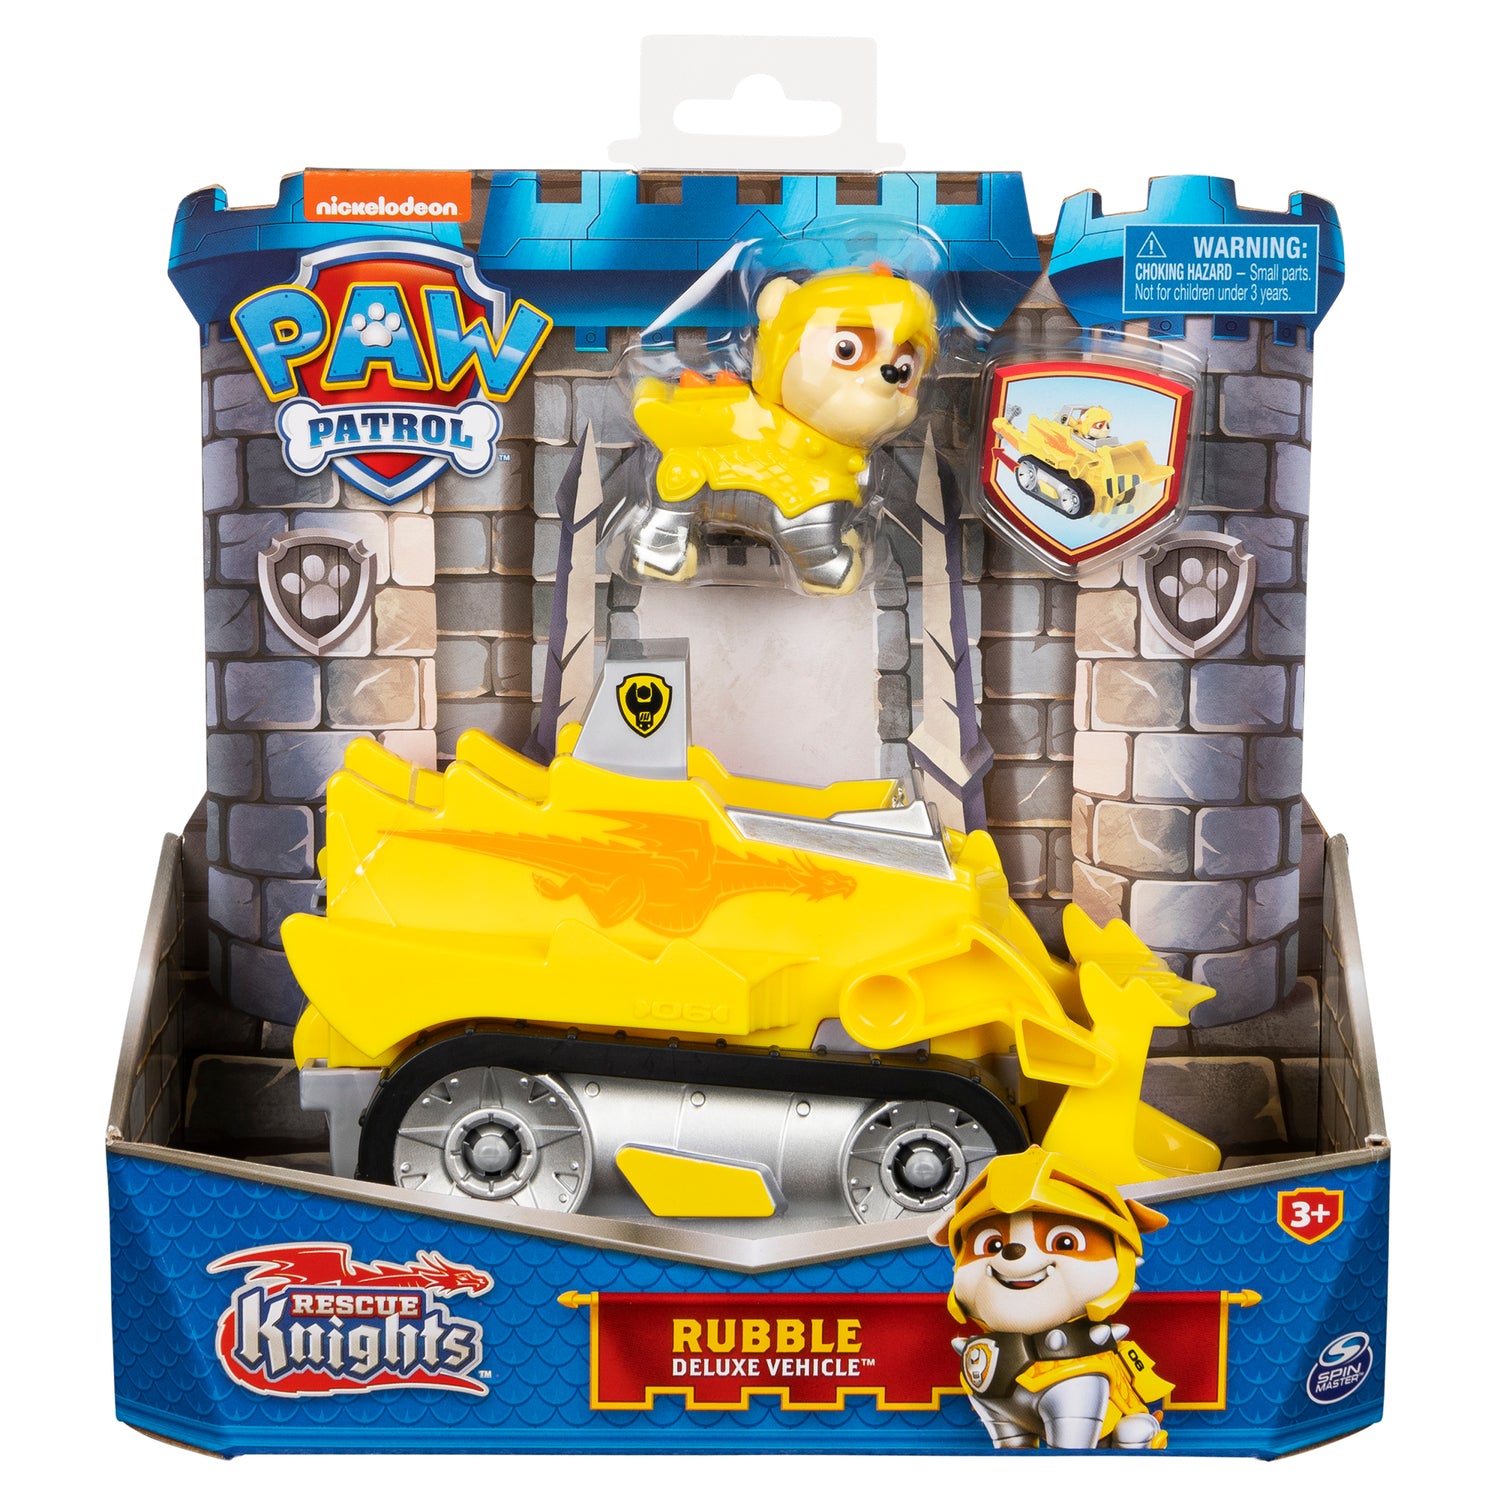 Rescue Knights Transforming Vehicle – PAW Patrol & Friends | Official Site